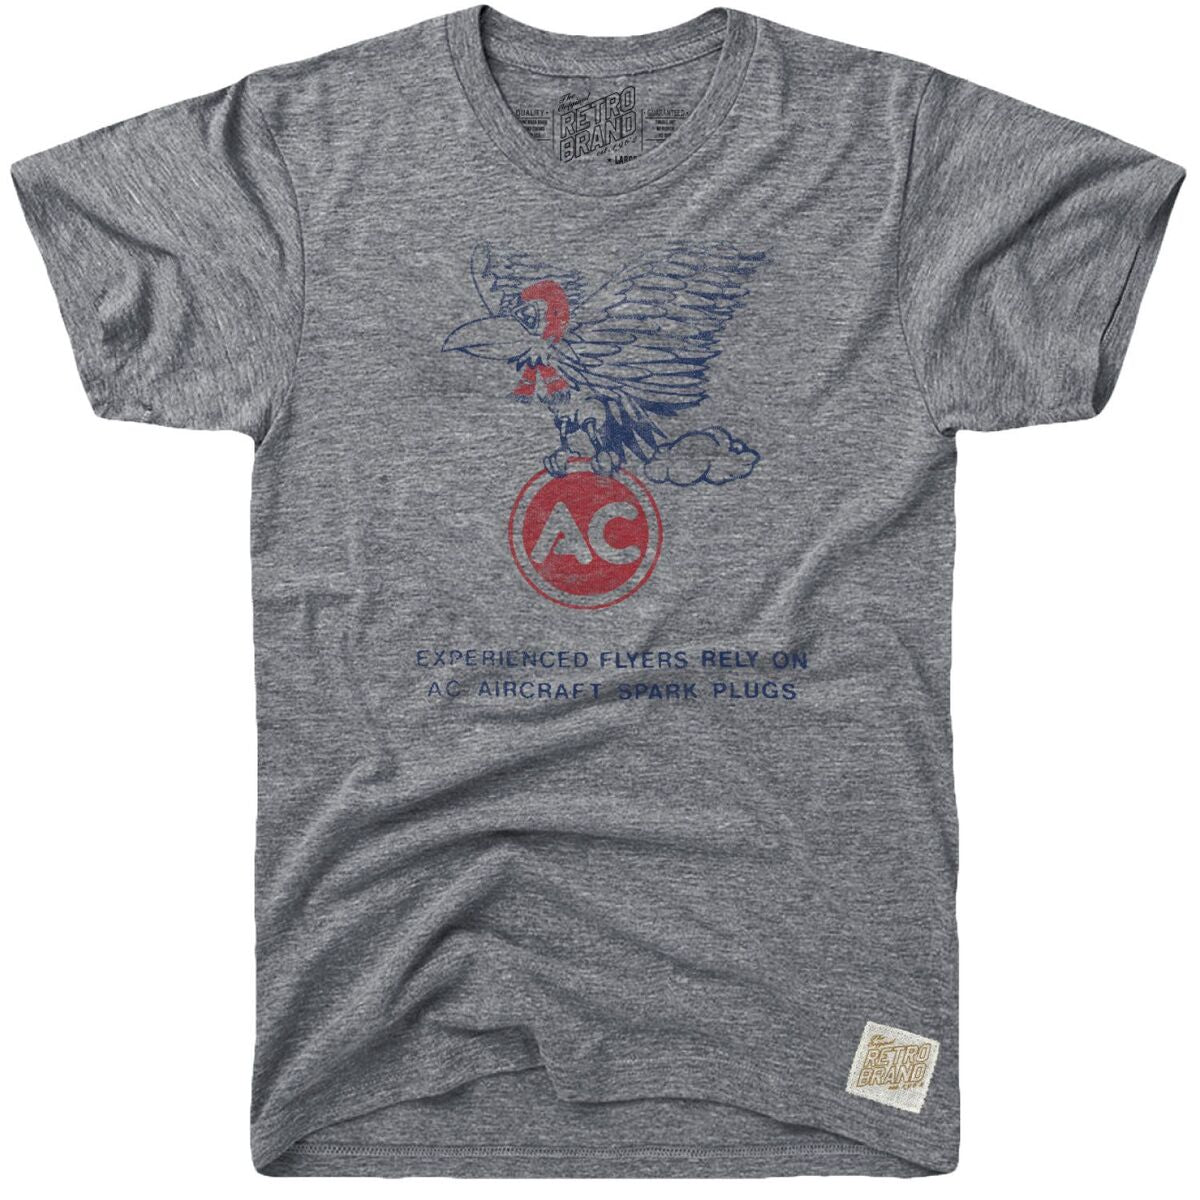 AC Delco Flyers mascot in vintage design with text "experienced flyers rely on AC aircraft spark plugs" on grey tri-blend tee.